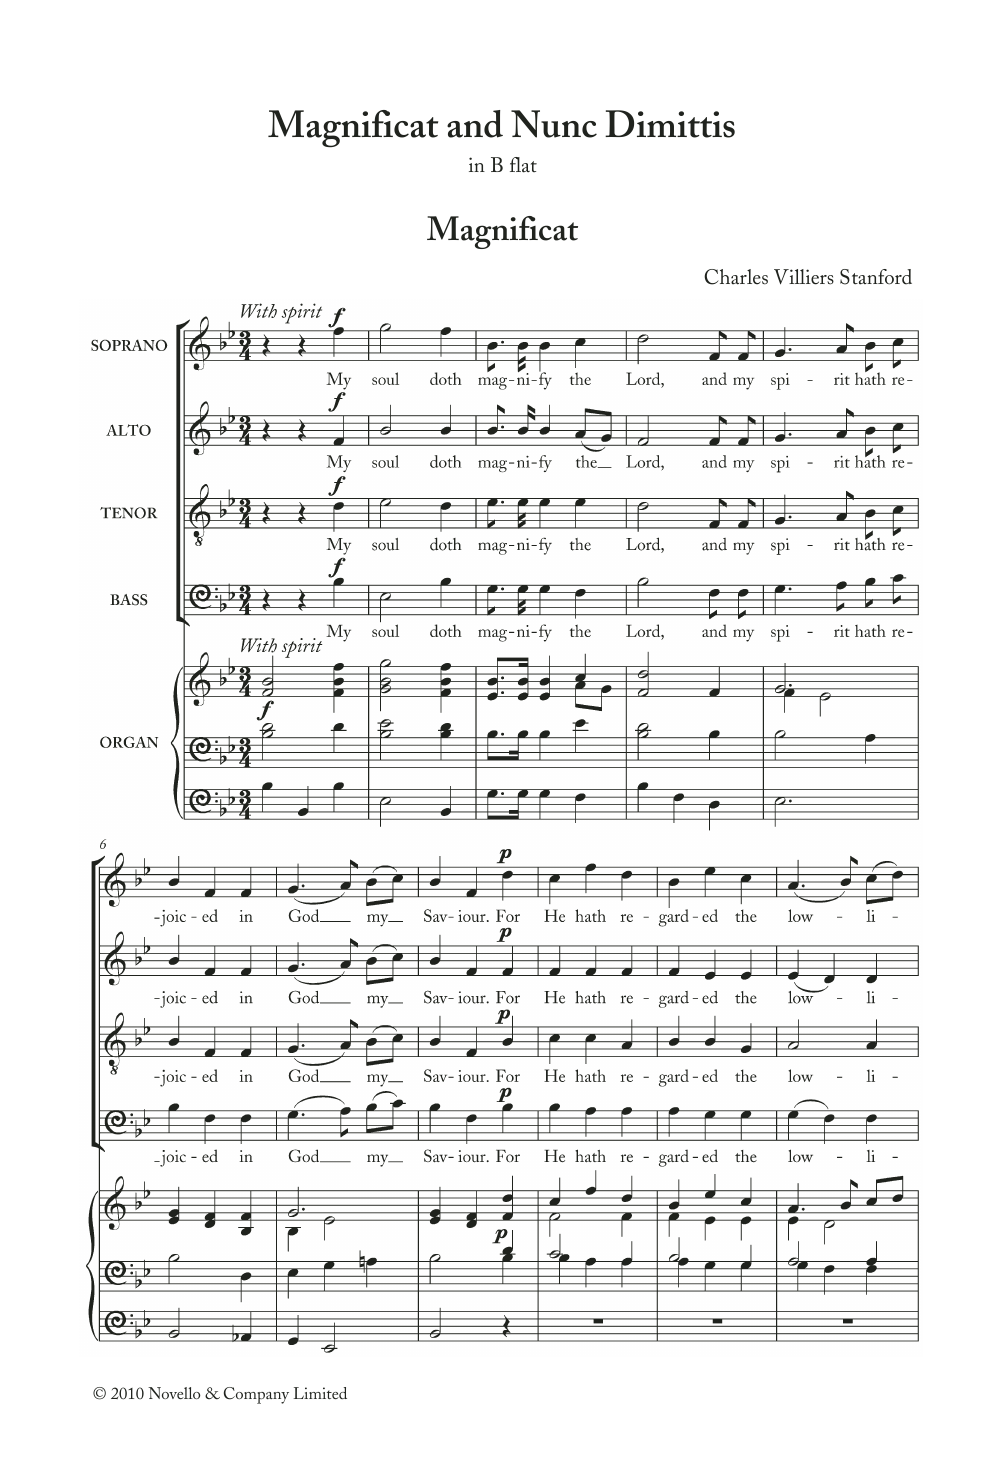 Download Charles Villiers Stanford Magnificat And Nunc Dimittis In B Flat Sheet Music